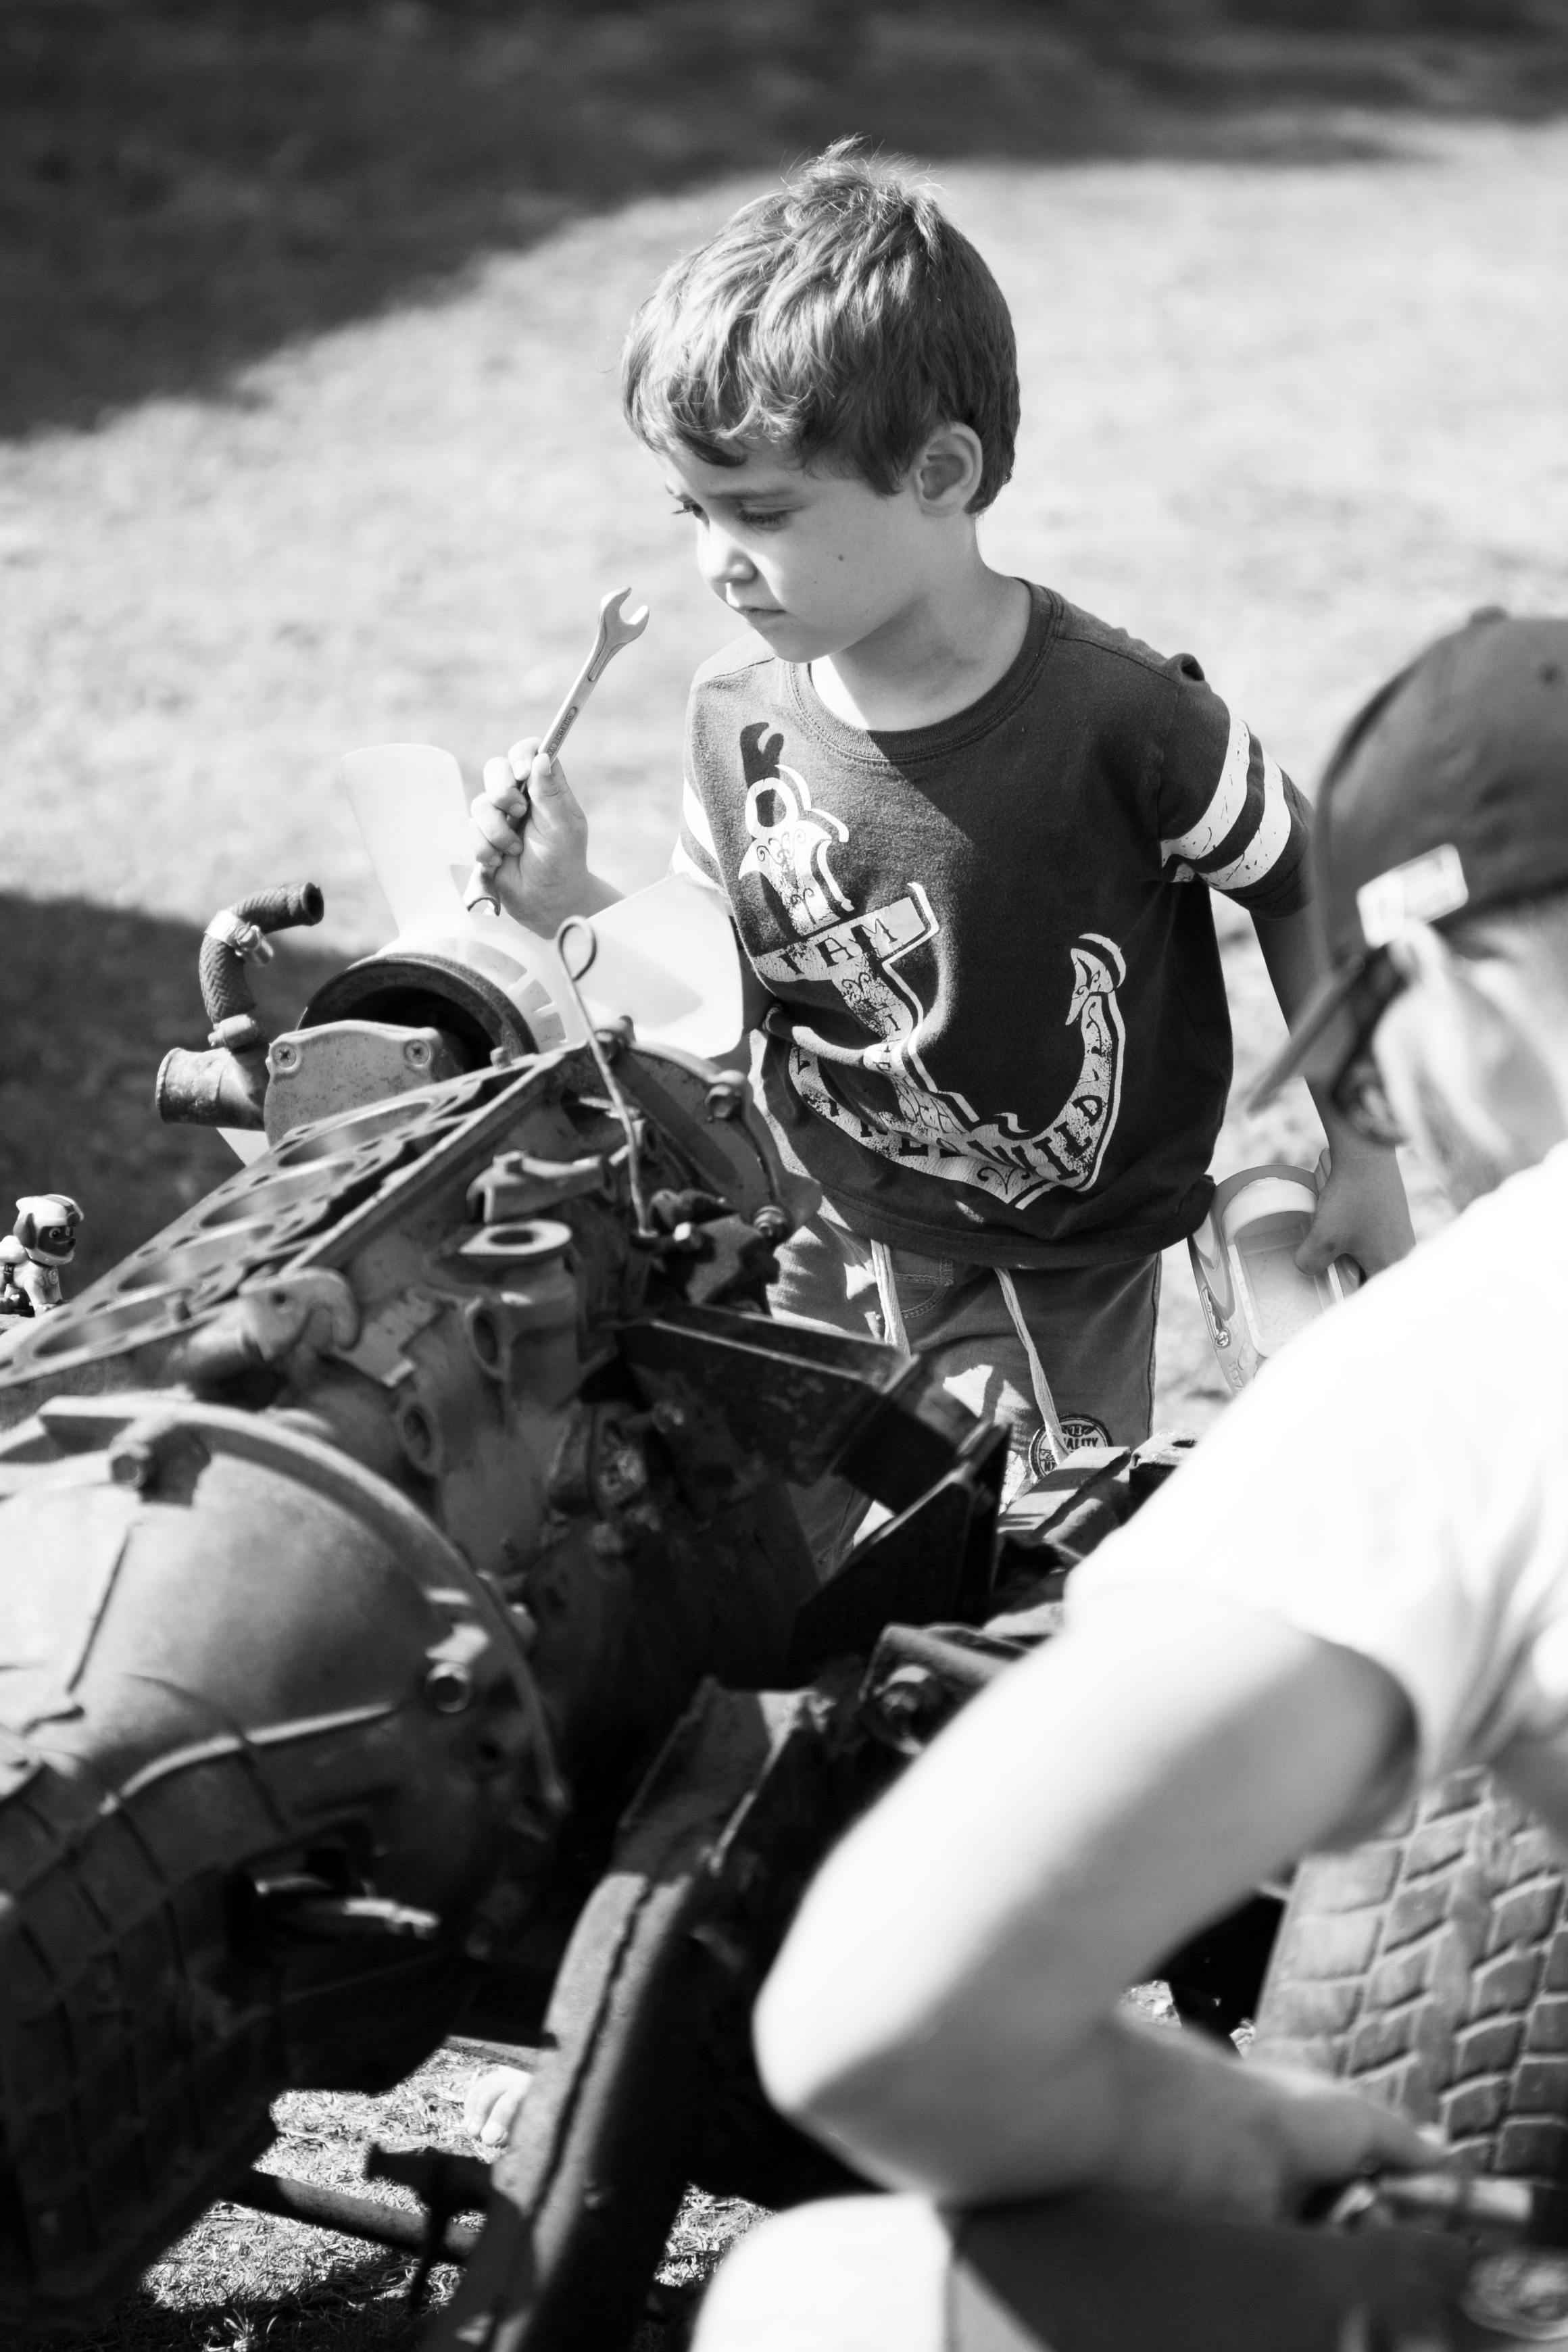 Free stock photo of boys, car engine, father and son